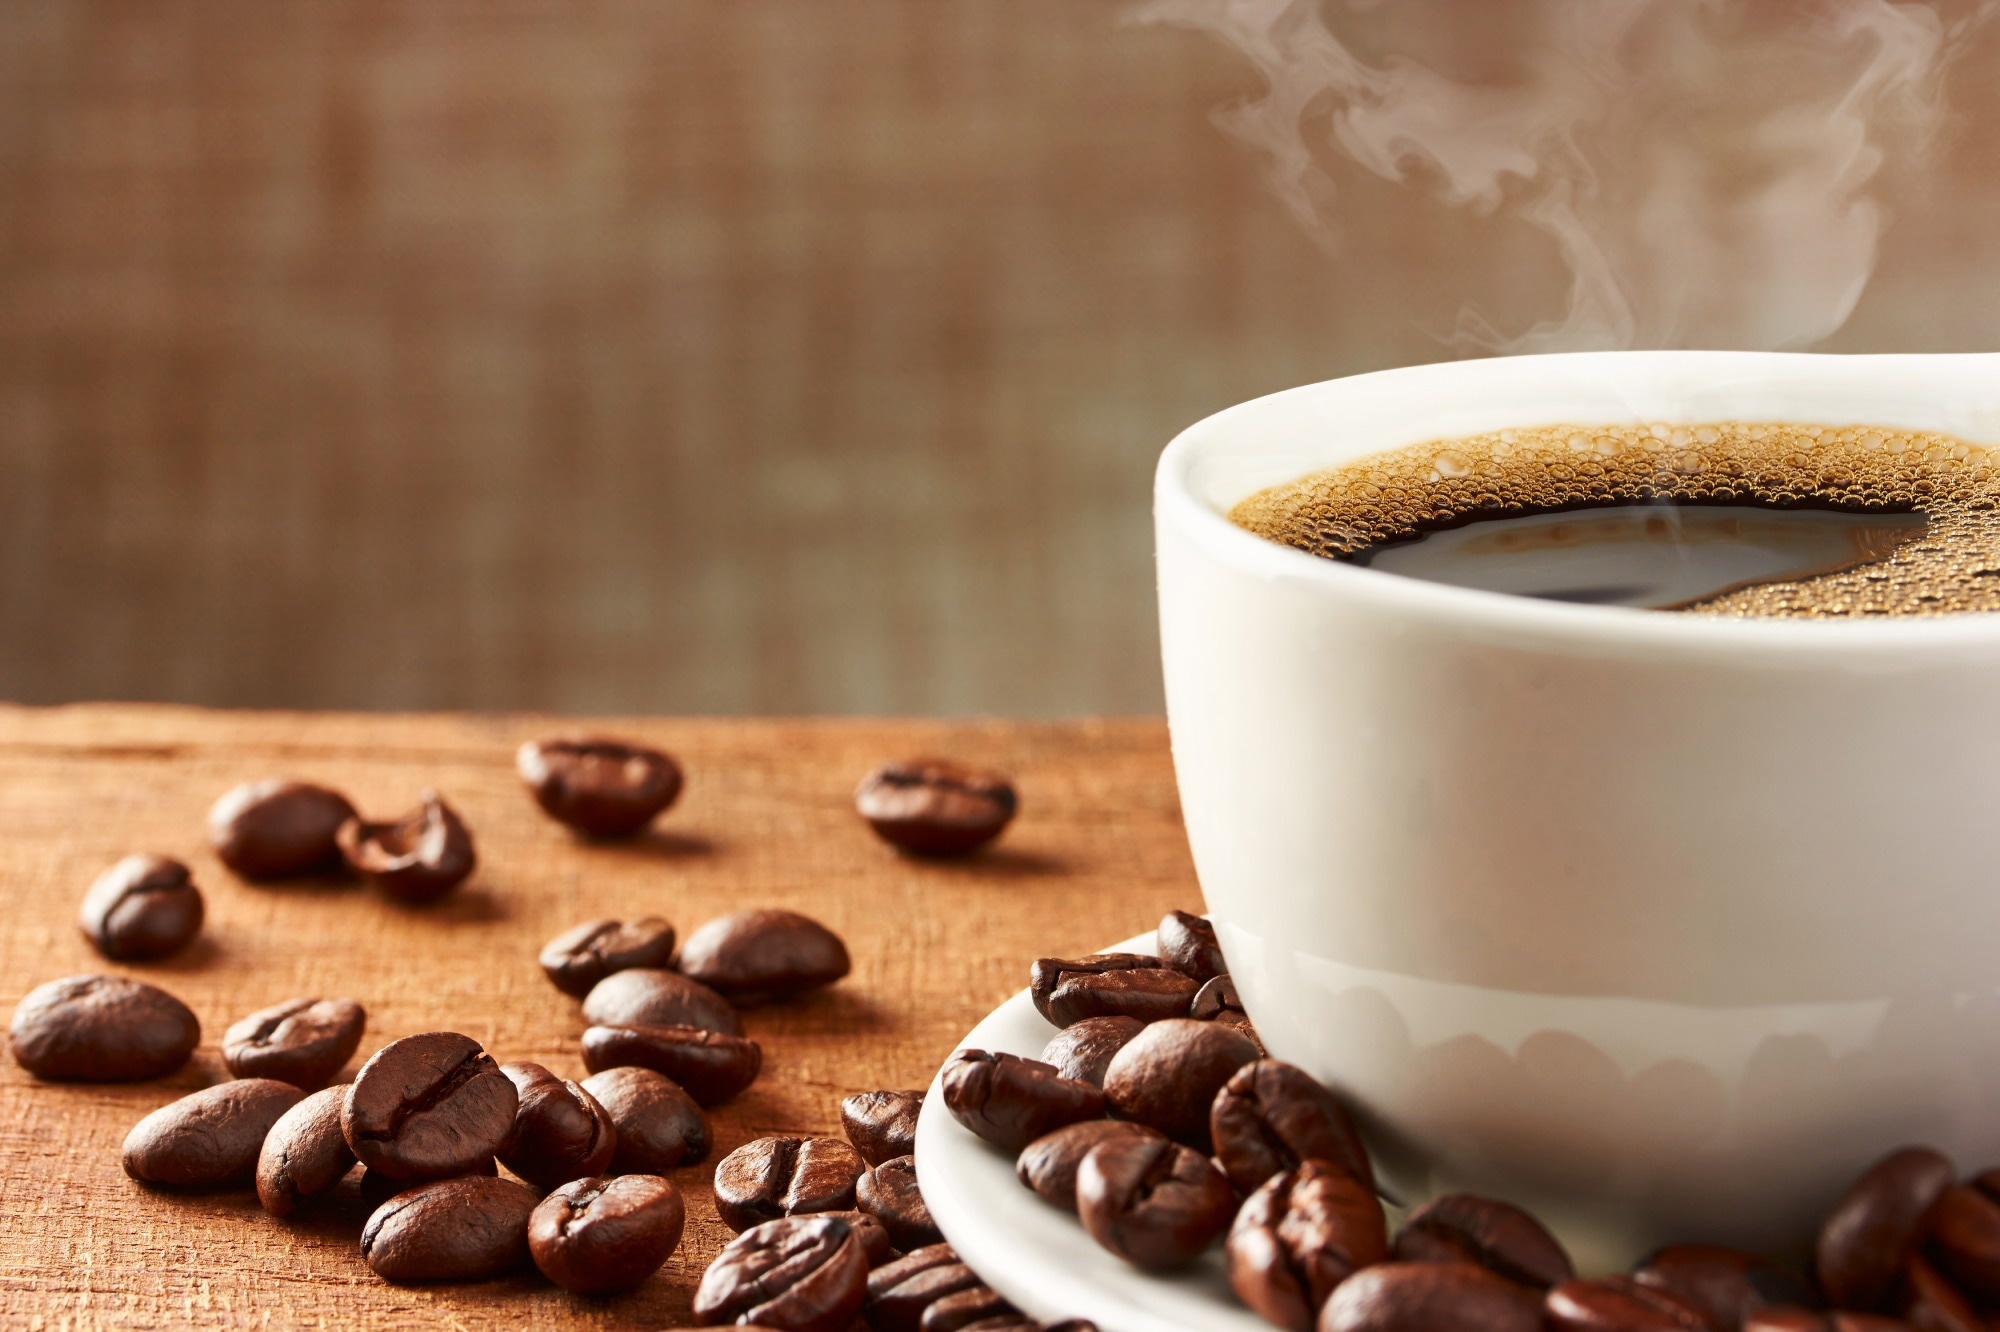 Study: The Association between Caffeine Consumption from Coffee and Tea and Sleep Health in Male and Female Older Adults: A Cross-Sectional Study. Image Credit: portumen/Shutterstock.com